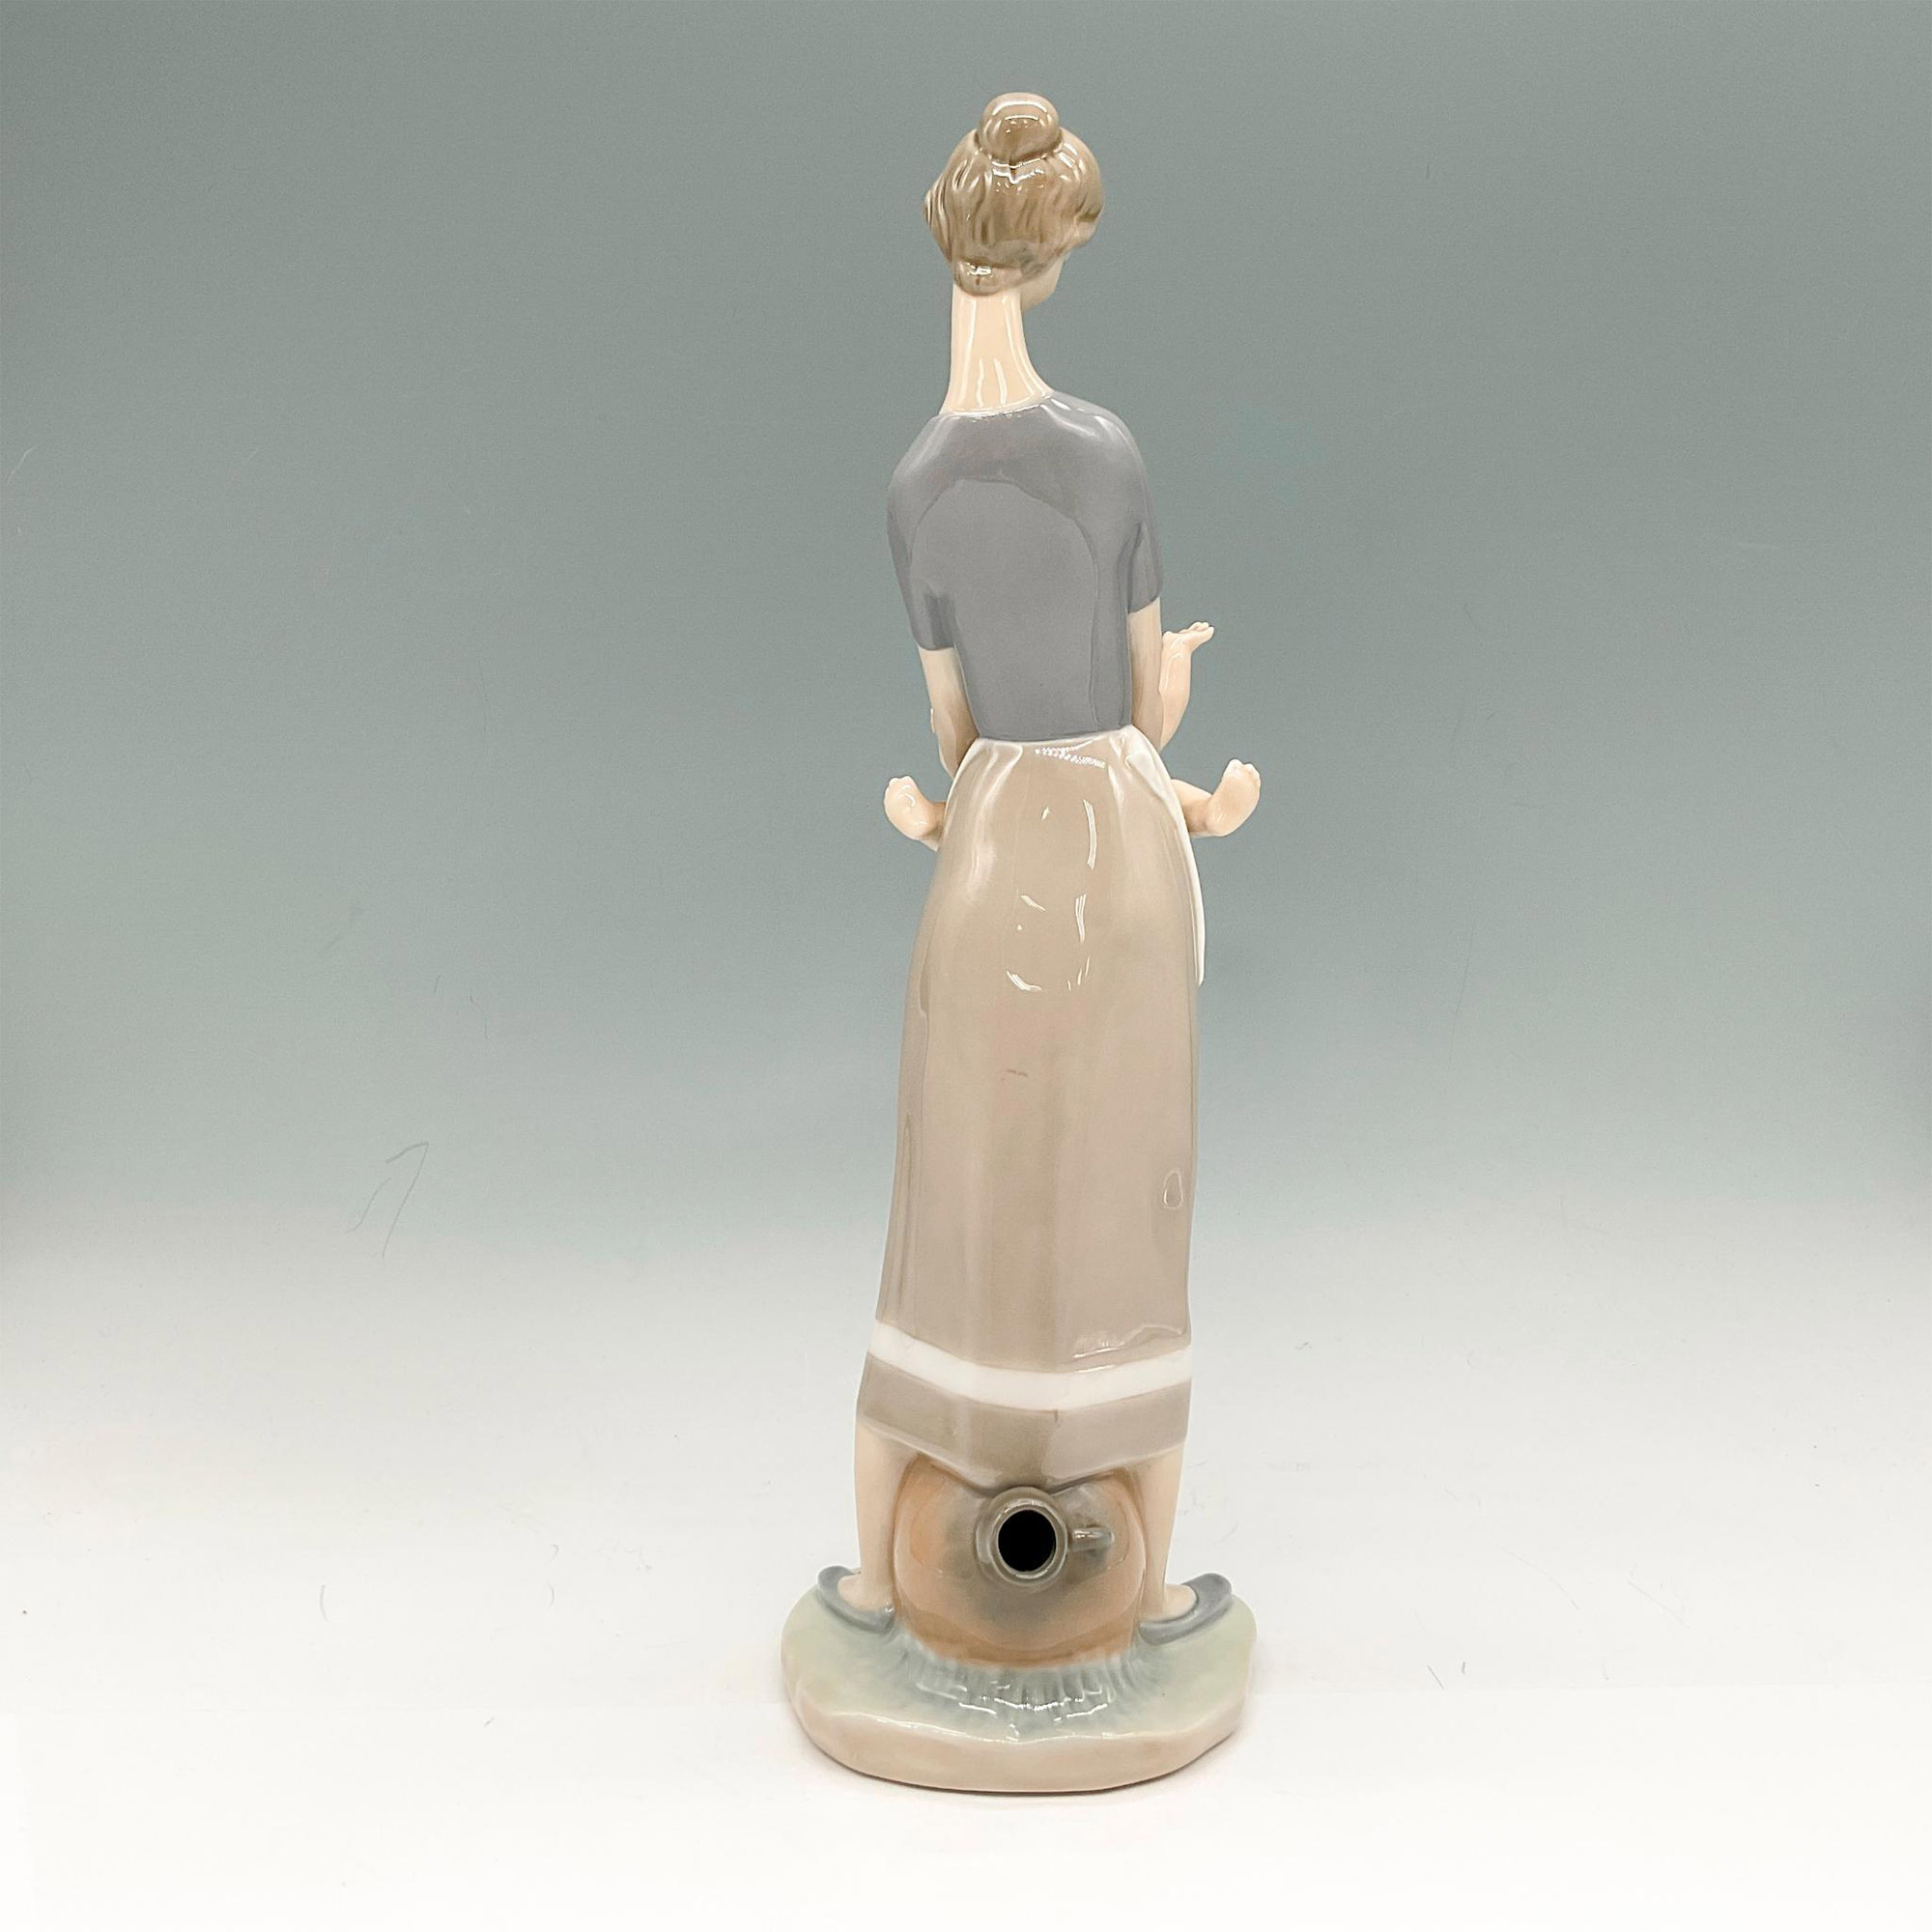 Mother and Child 1004575 - Lladro Porcelain Figurine - Image 2 of 3